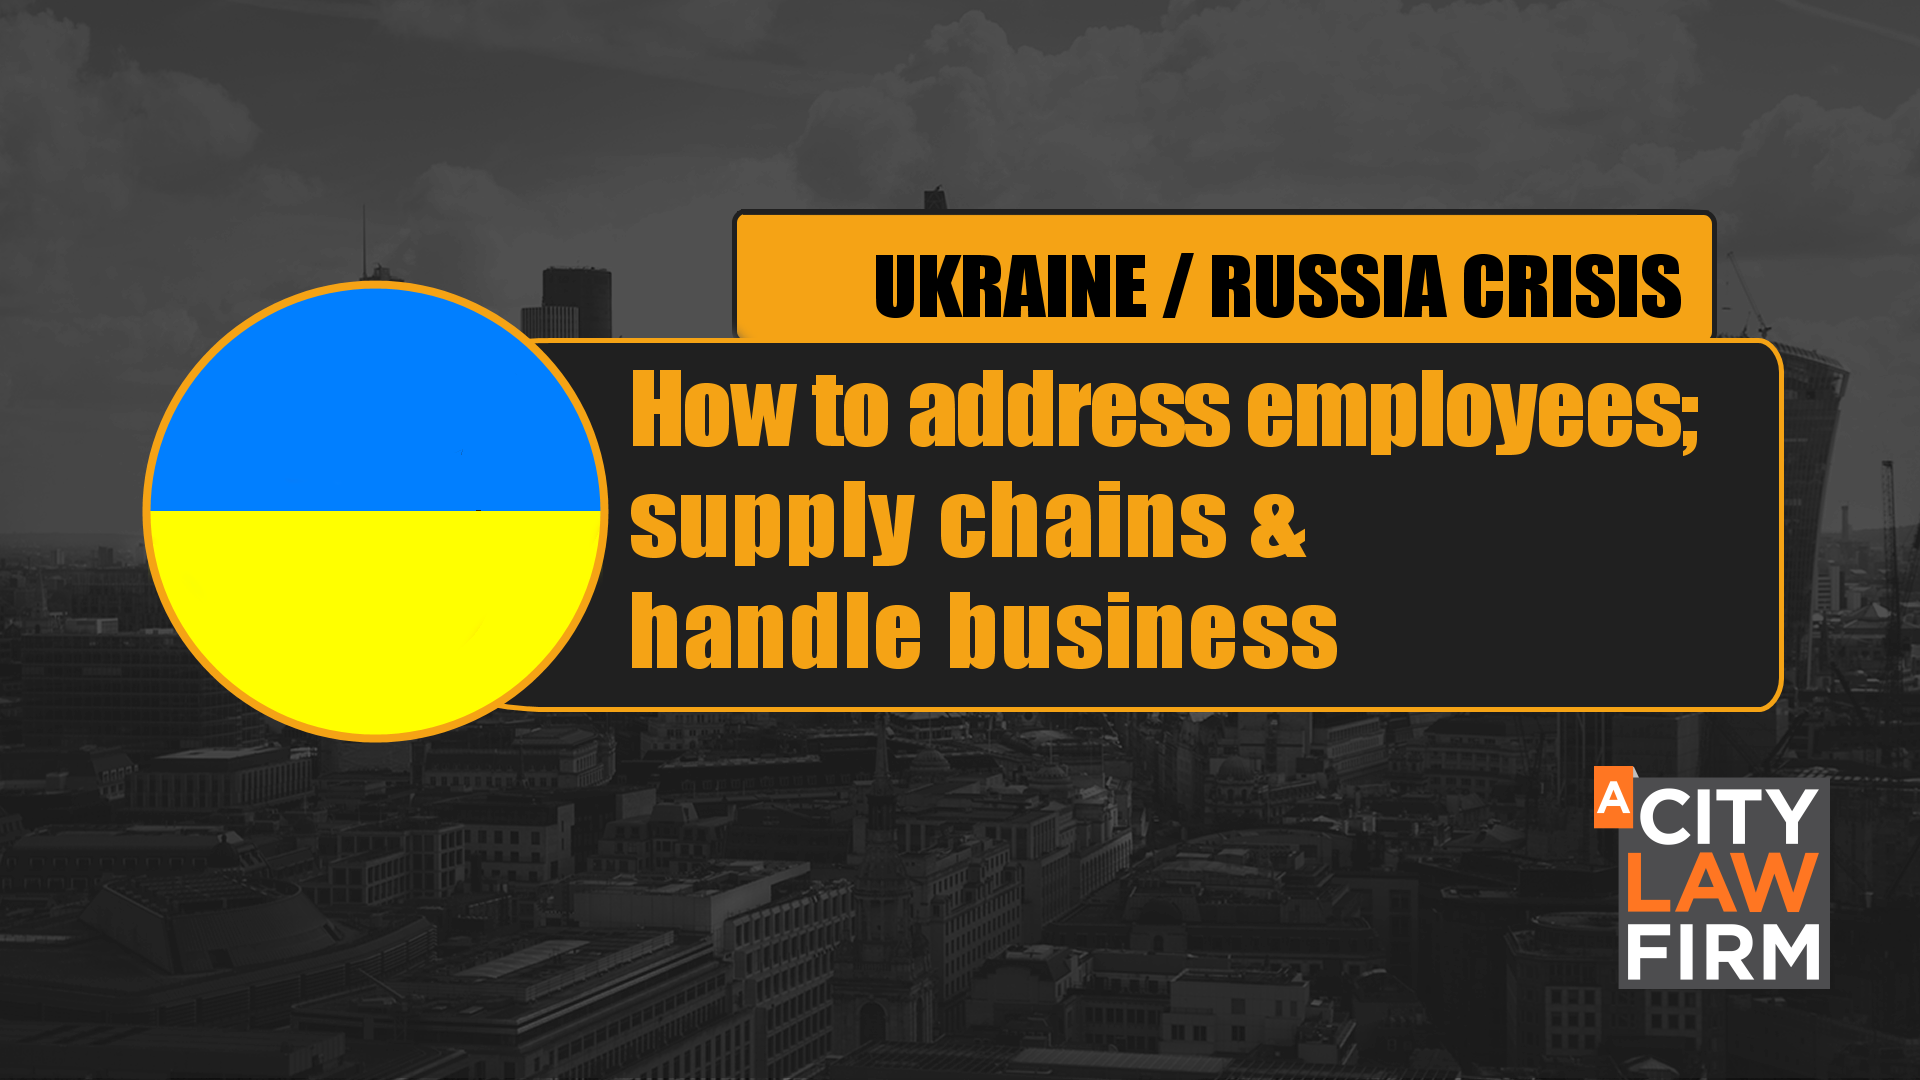 How to address employees; supply chains and handle business disruption due to the Ukraine/Russia crisis.